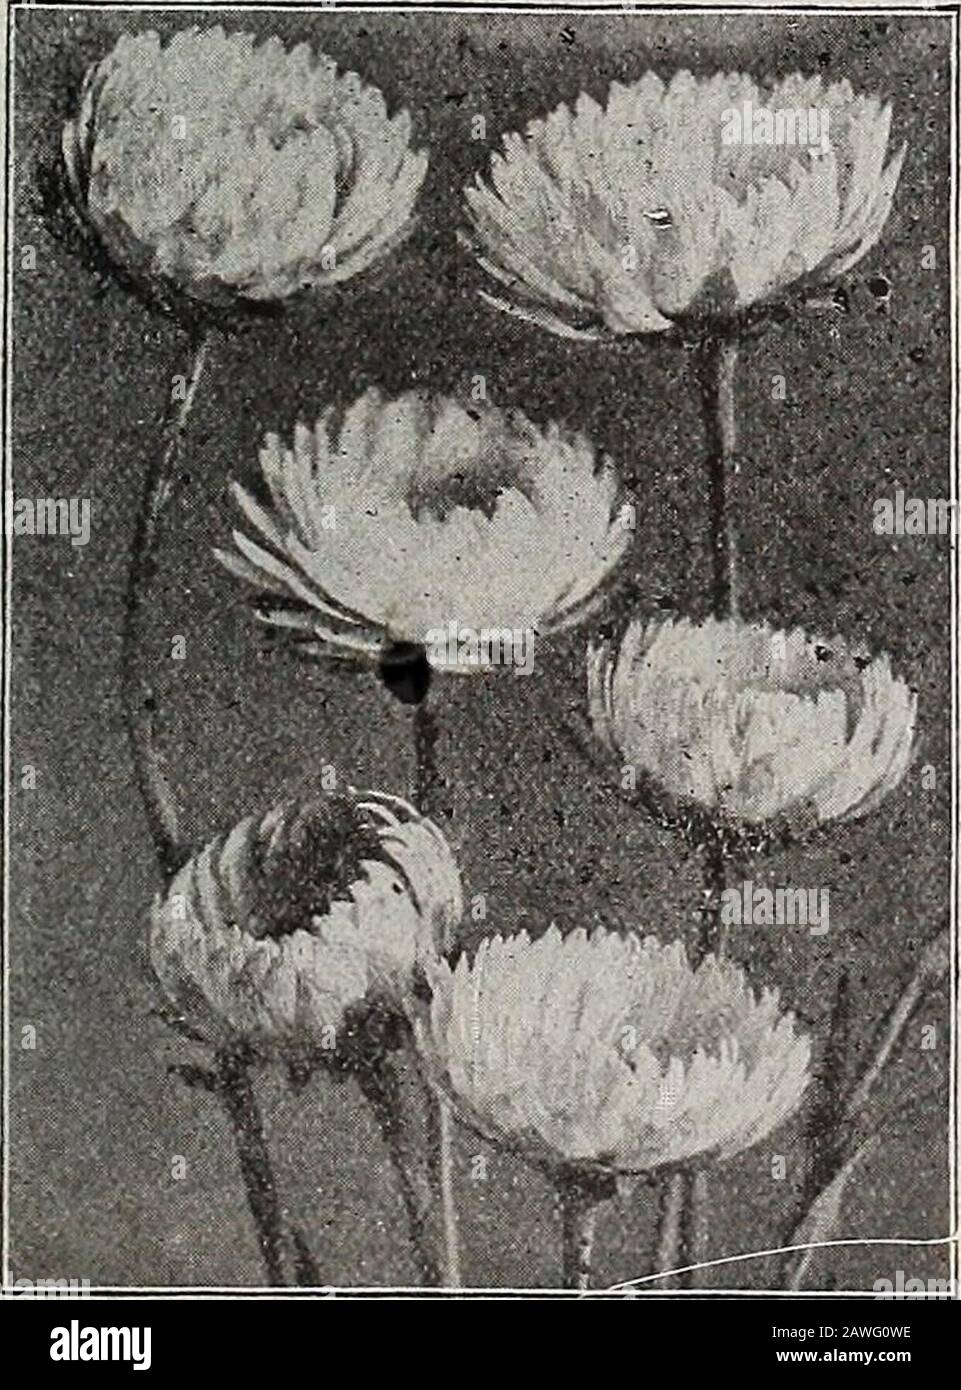 Dreer's 72nd annual edition garden book : 1910 . ACROrLTNTlTM. HOW TO GROW FLOWERS FROM SEED. This subject is fully covered by the articles on pages 51 to 53. (e?) 64 Stock Photo